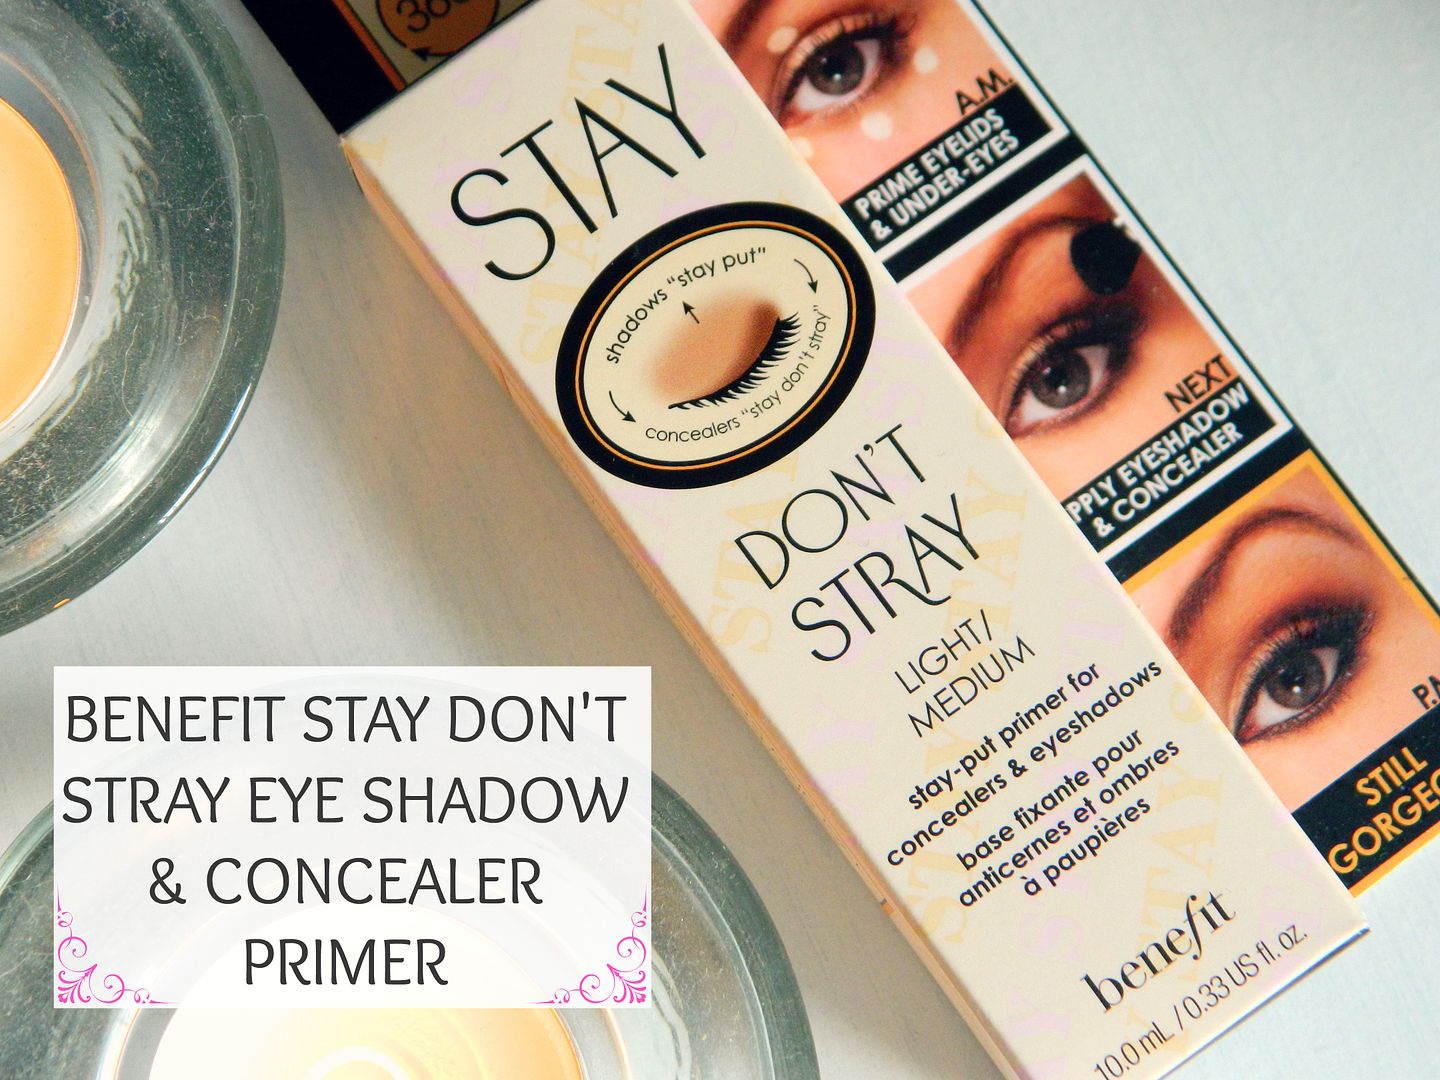 Benefit Stay Don't Stray Eye Shadow Concealer Primer Review Belle-amie UK Beauty Fashion Lifestyle Blog